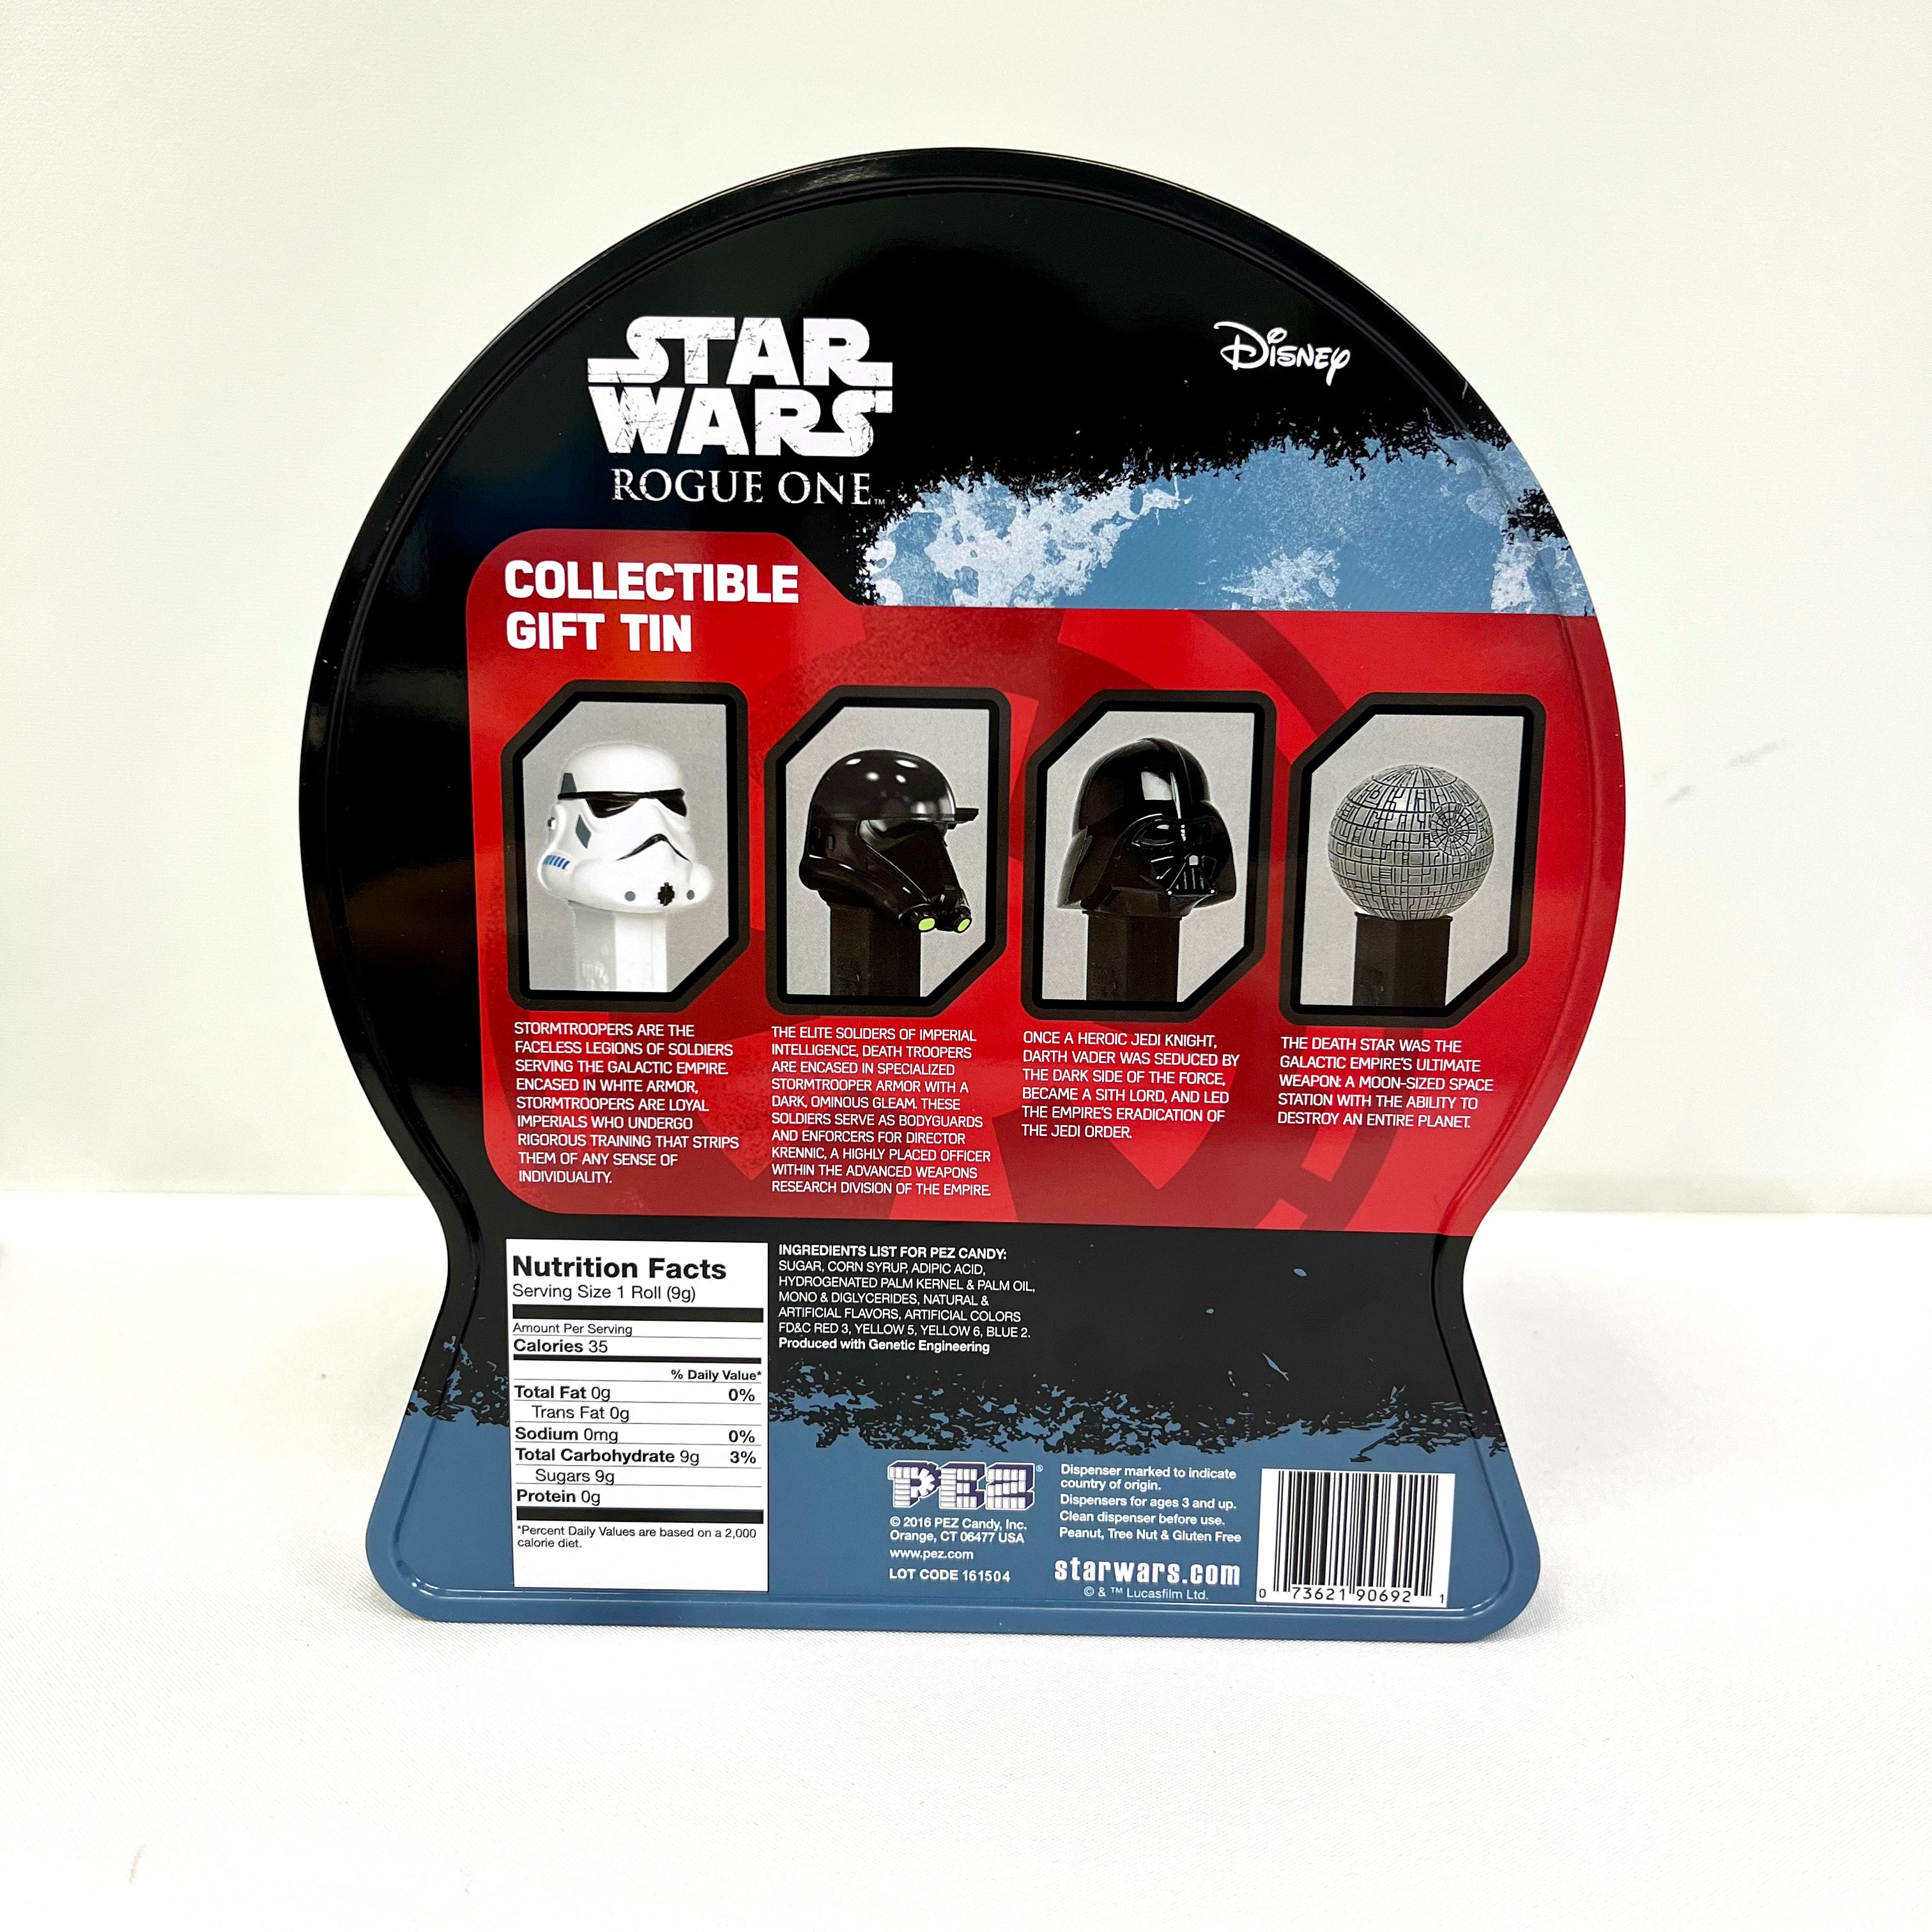 Star Wars Rogue One PEZ Candy Collectible Gift Tin